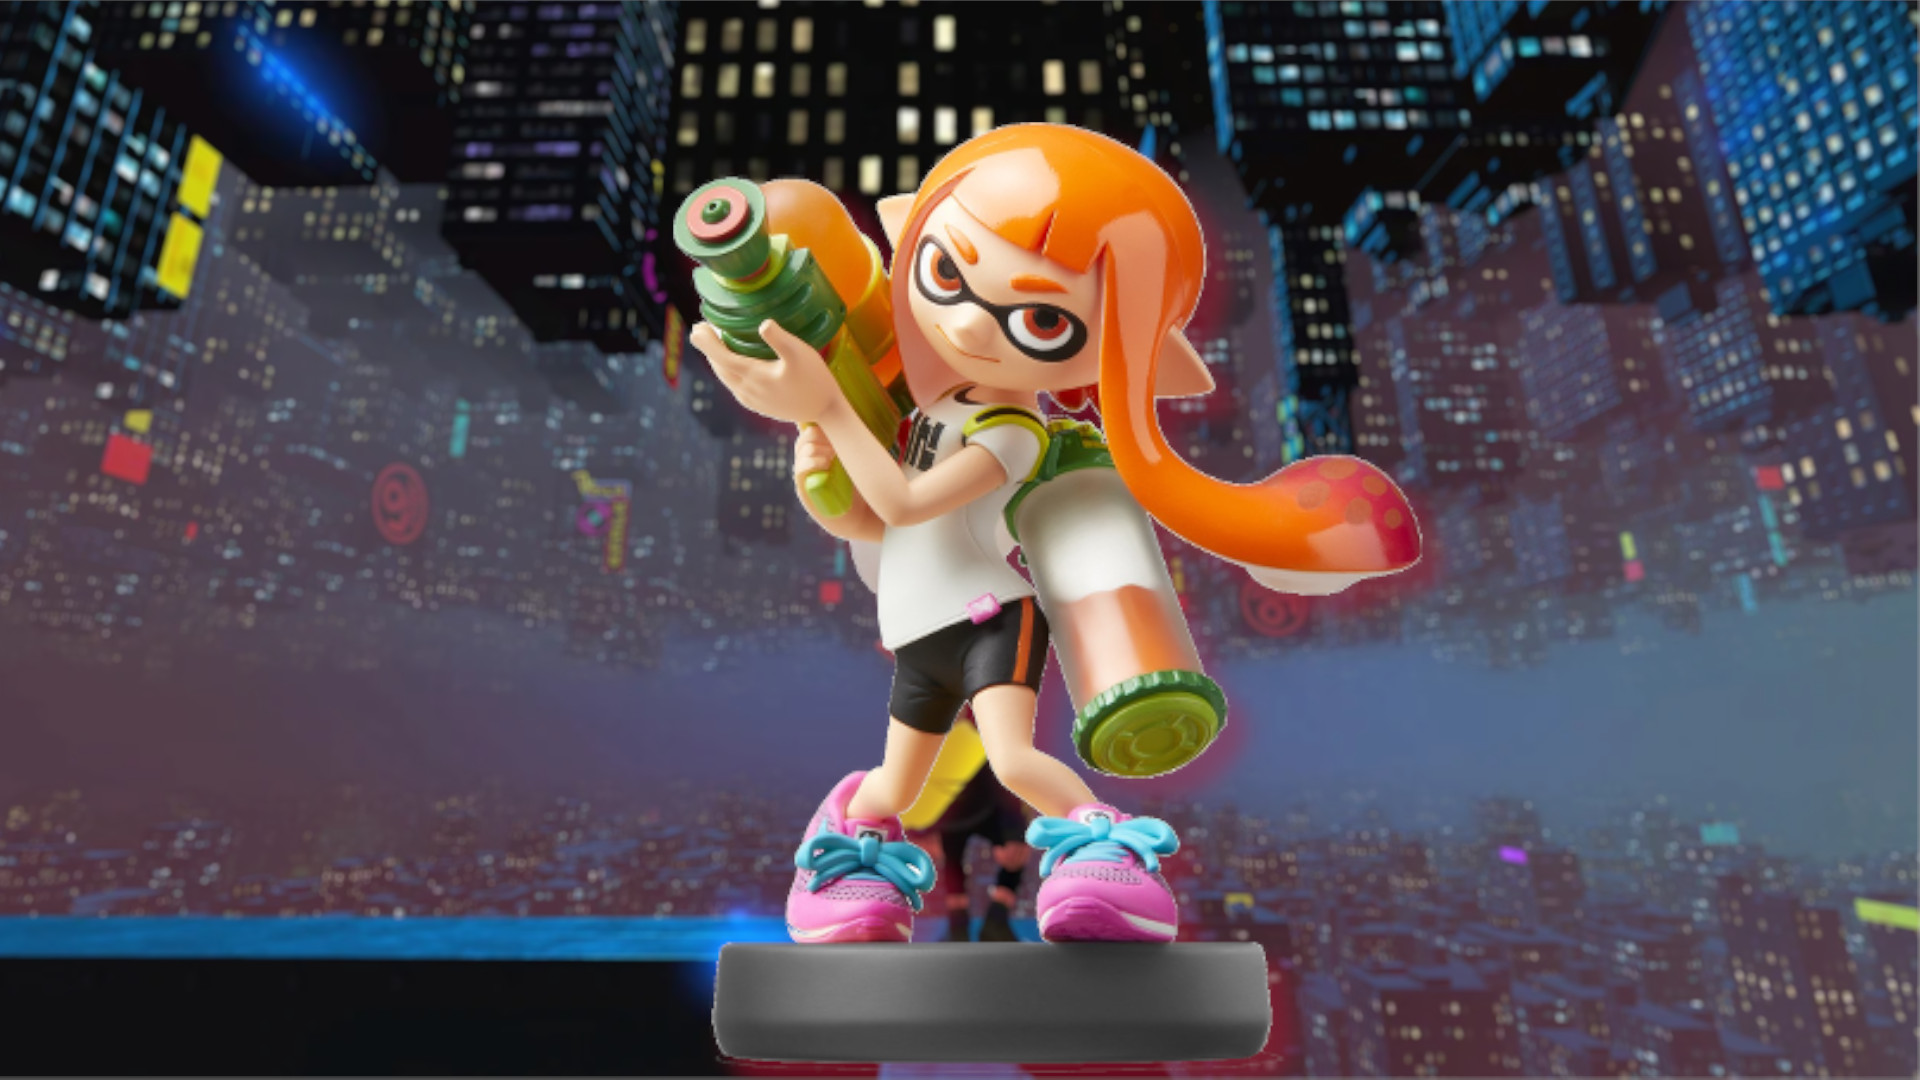 The Super Smash Bros. Inkling Girl Splatoon amiibo, posing on front of a dark blurred background.